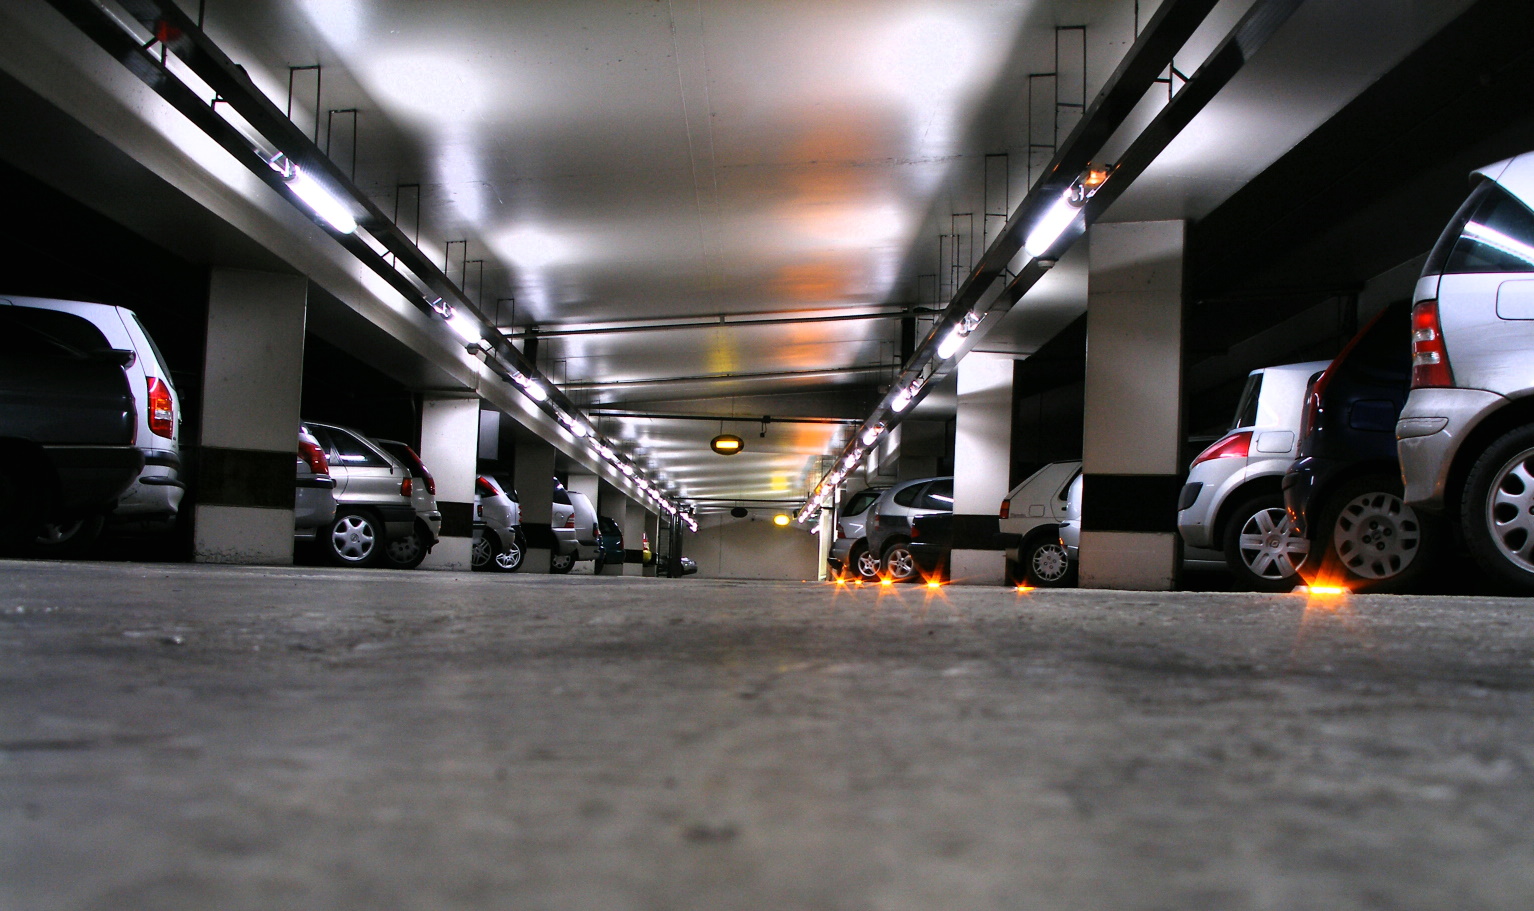 Peter Park Enables Contactless and Secure Parking